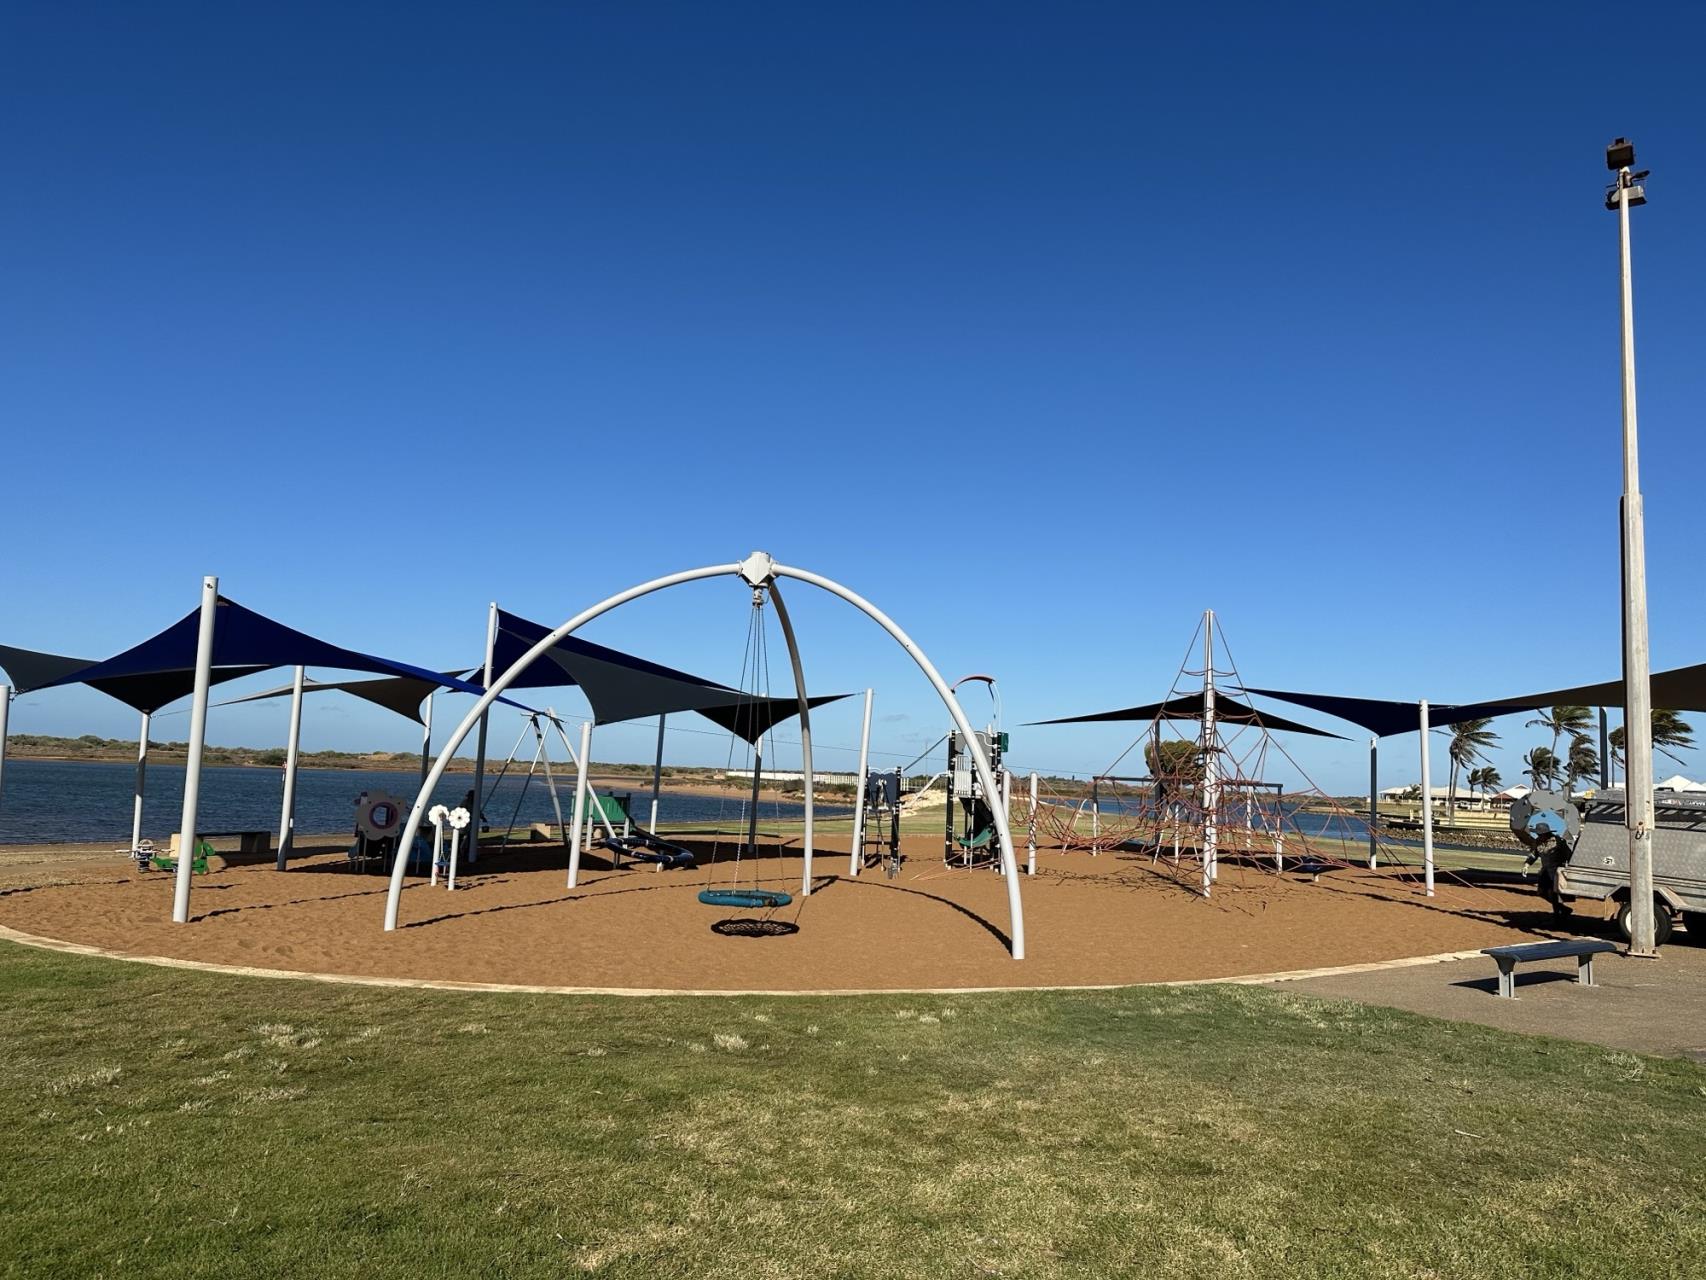 Shire Project Brings Shade to Town Beach